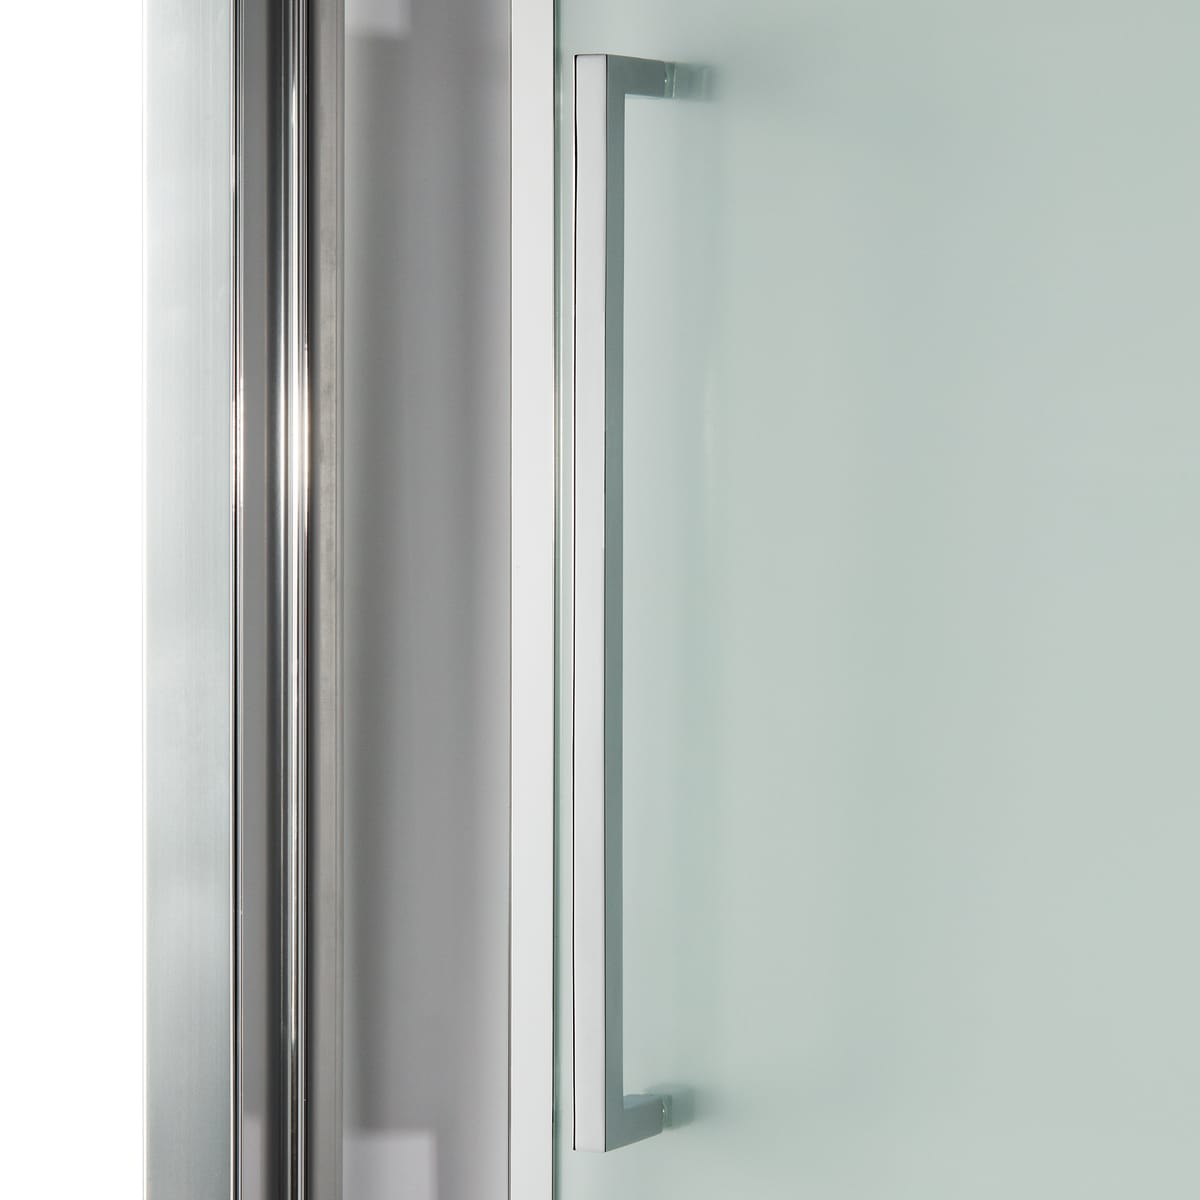 RECORD SALOON DOOR L 97-101 H 195 CM CLEAR GLASS 6 MM CHROME